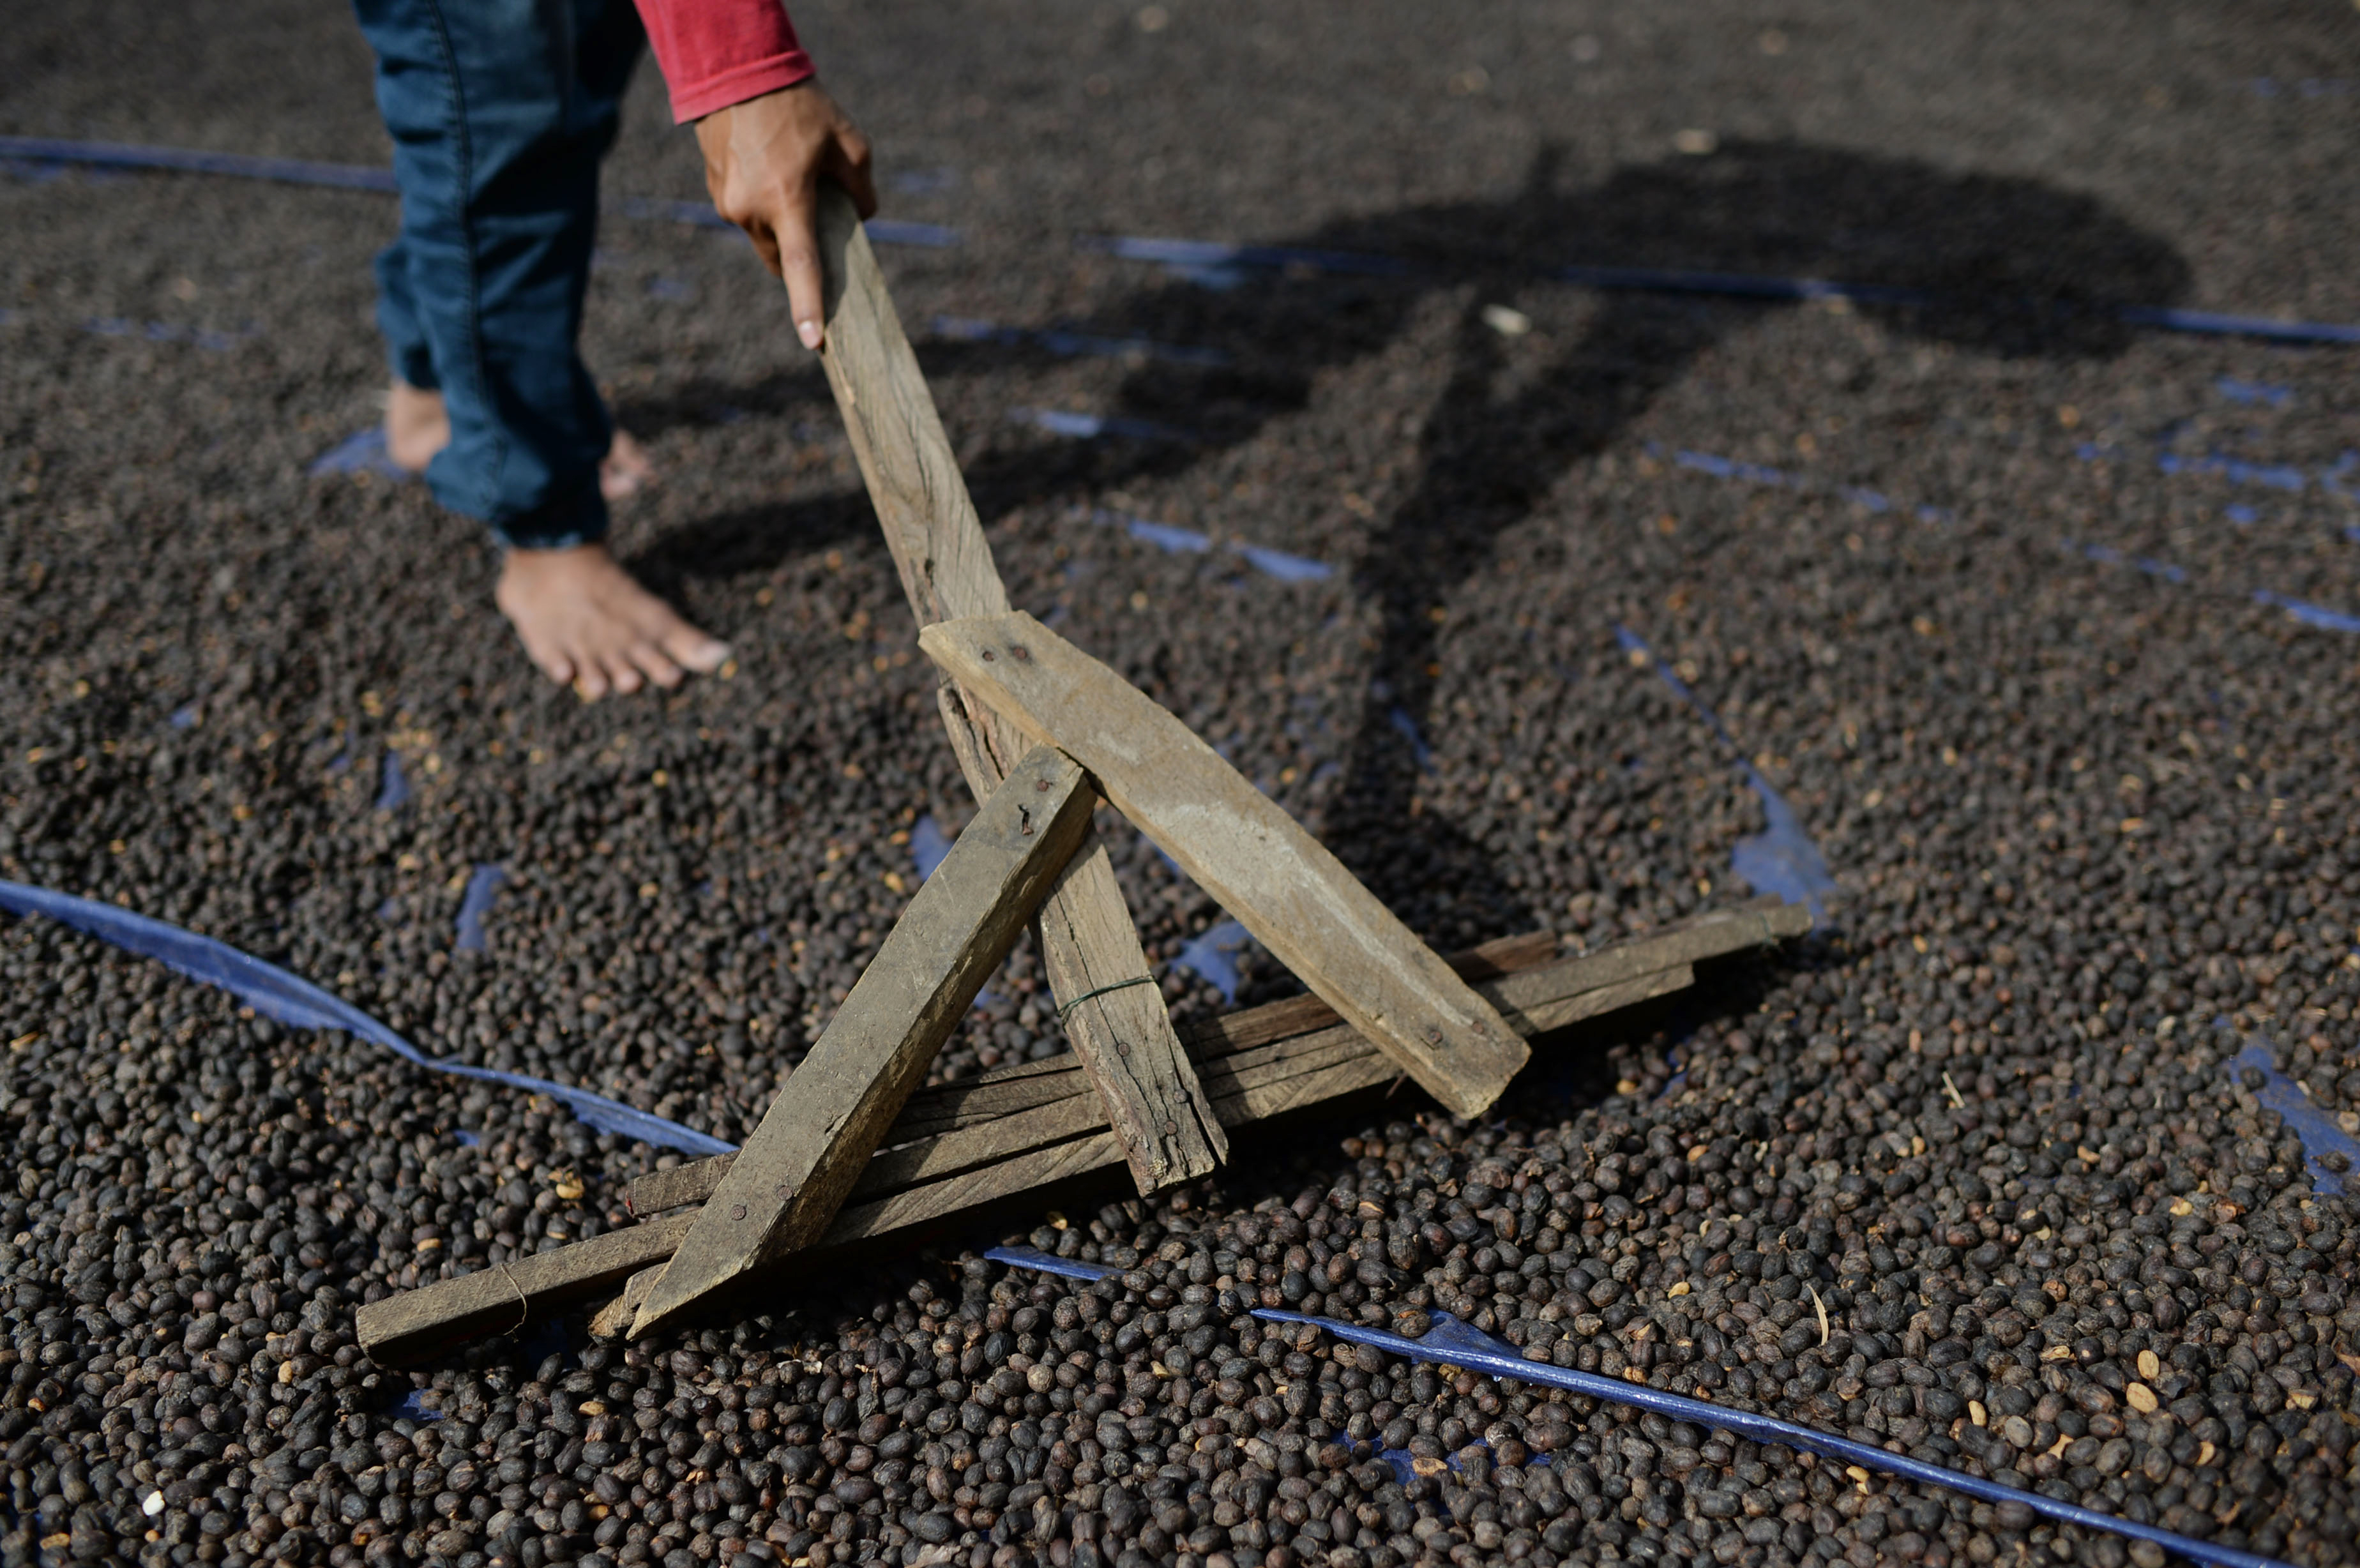 An employee lays out Arabica coffee cherries for drying at the Solok Radjo Cooperative coffee farm in Alahan Panjang, West Sumatra, Indonesia, on Friday, July 15, 2016. Coffee production in Indonesia will probably drop 10 percent this year after dry weather caused by the worst El Nino in almost two decades damaged some crops and delayed the harvest. Photographer: Dimas (Dimas Ardian/Bloomberg via Getty Images)